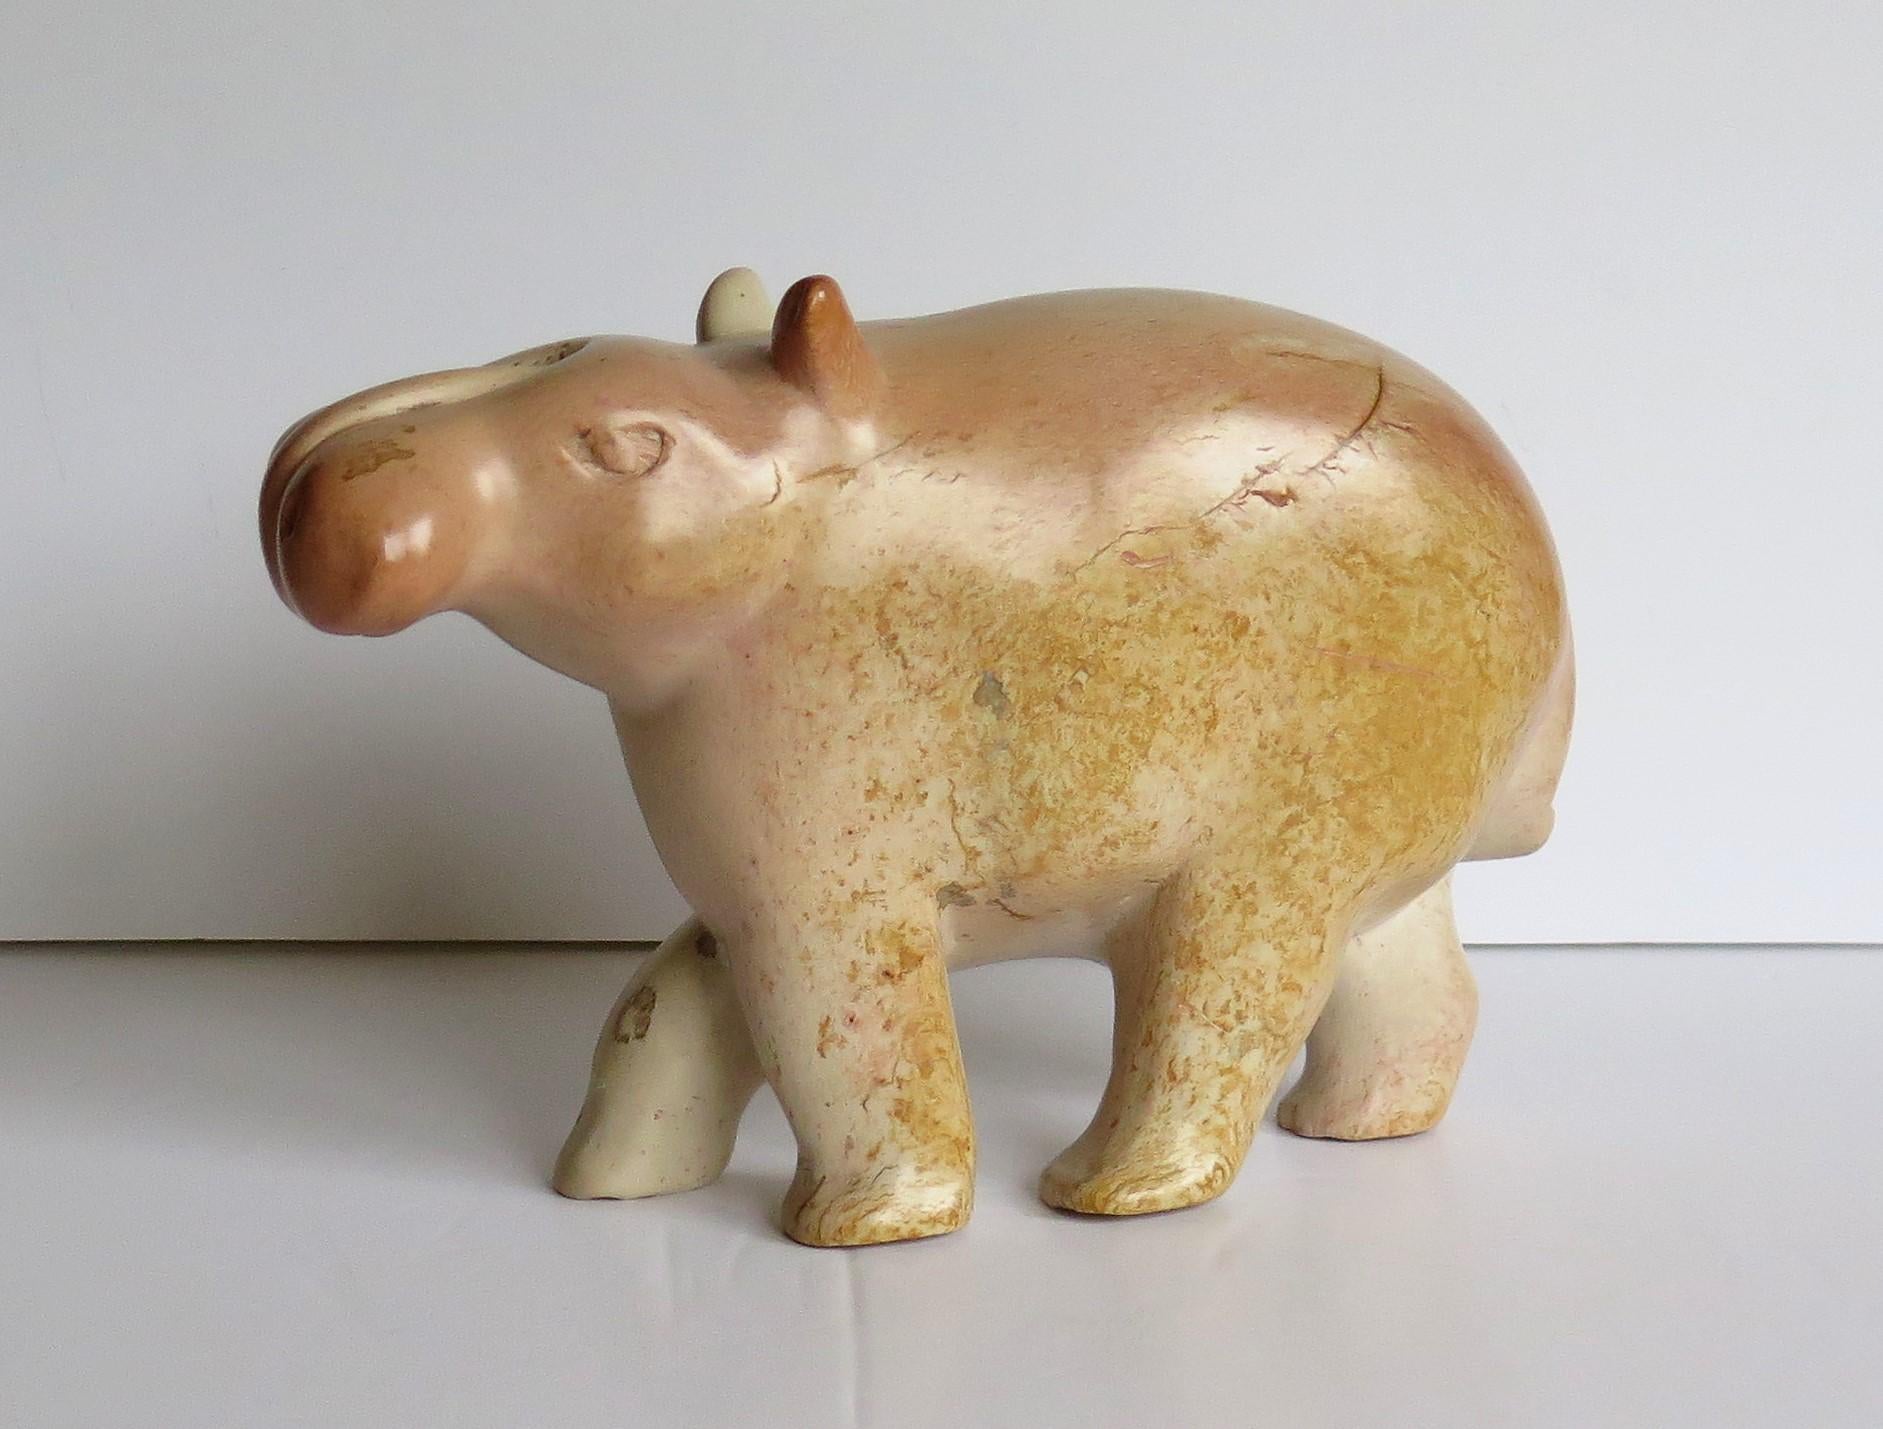 This is an unusual hand carved natural stone, modernist Folk Art, model of a hippopotamus or hippo, which we date to the mid-20th century.

The 